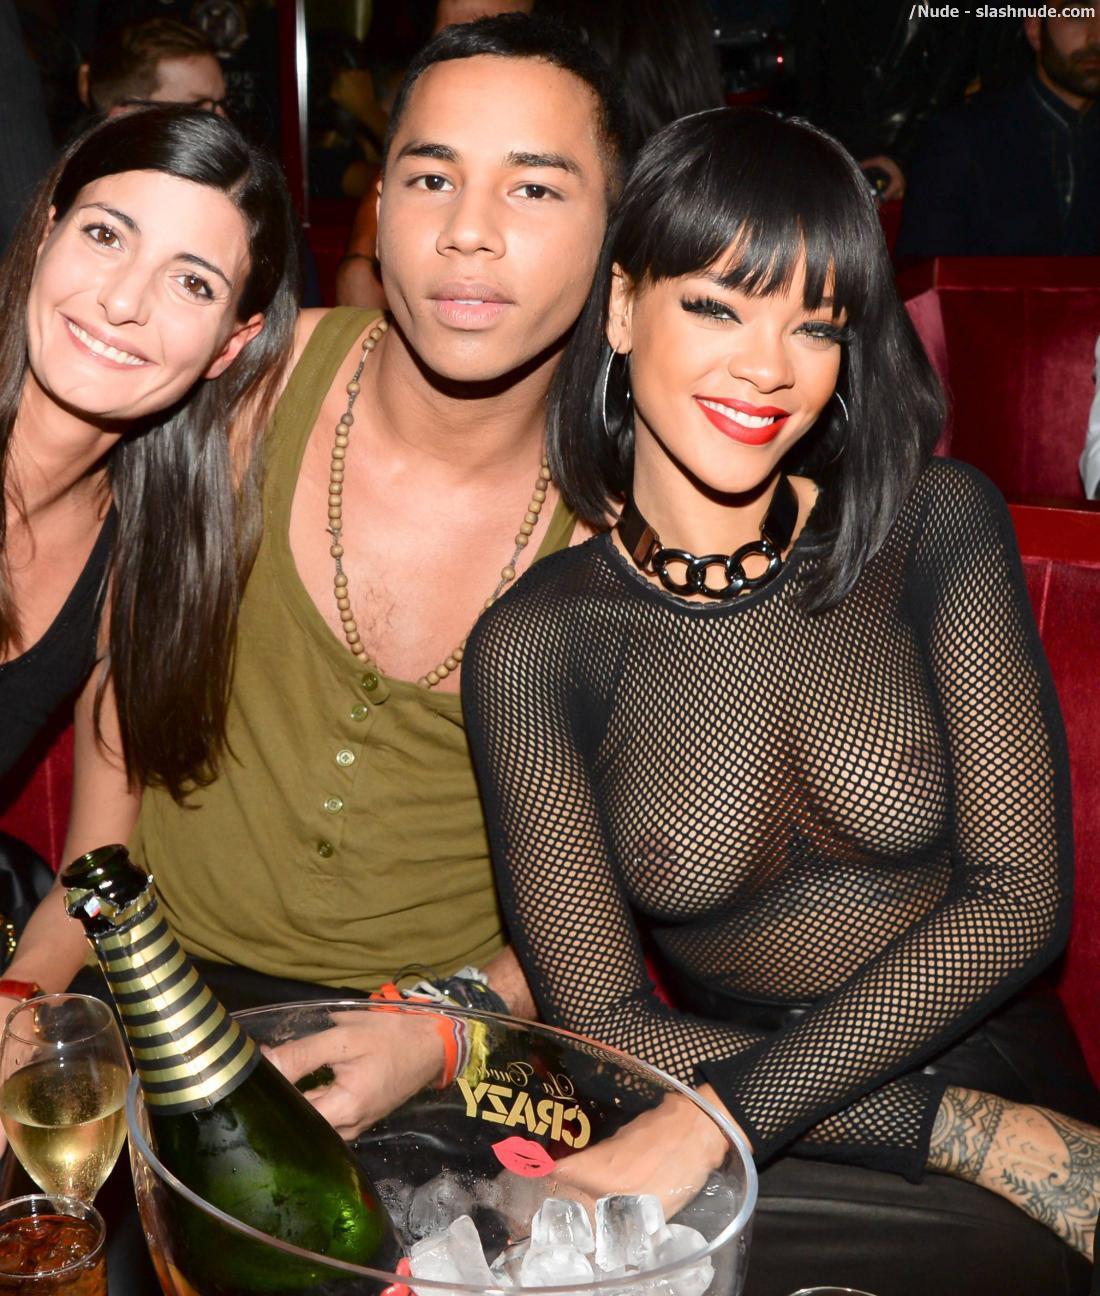 Rihanna Breasts In Totally See Through Mesh Top At Paris Party 1